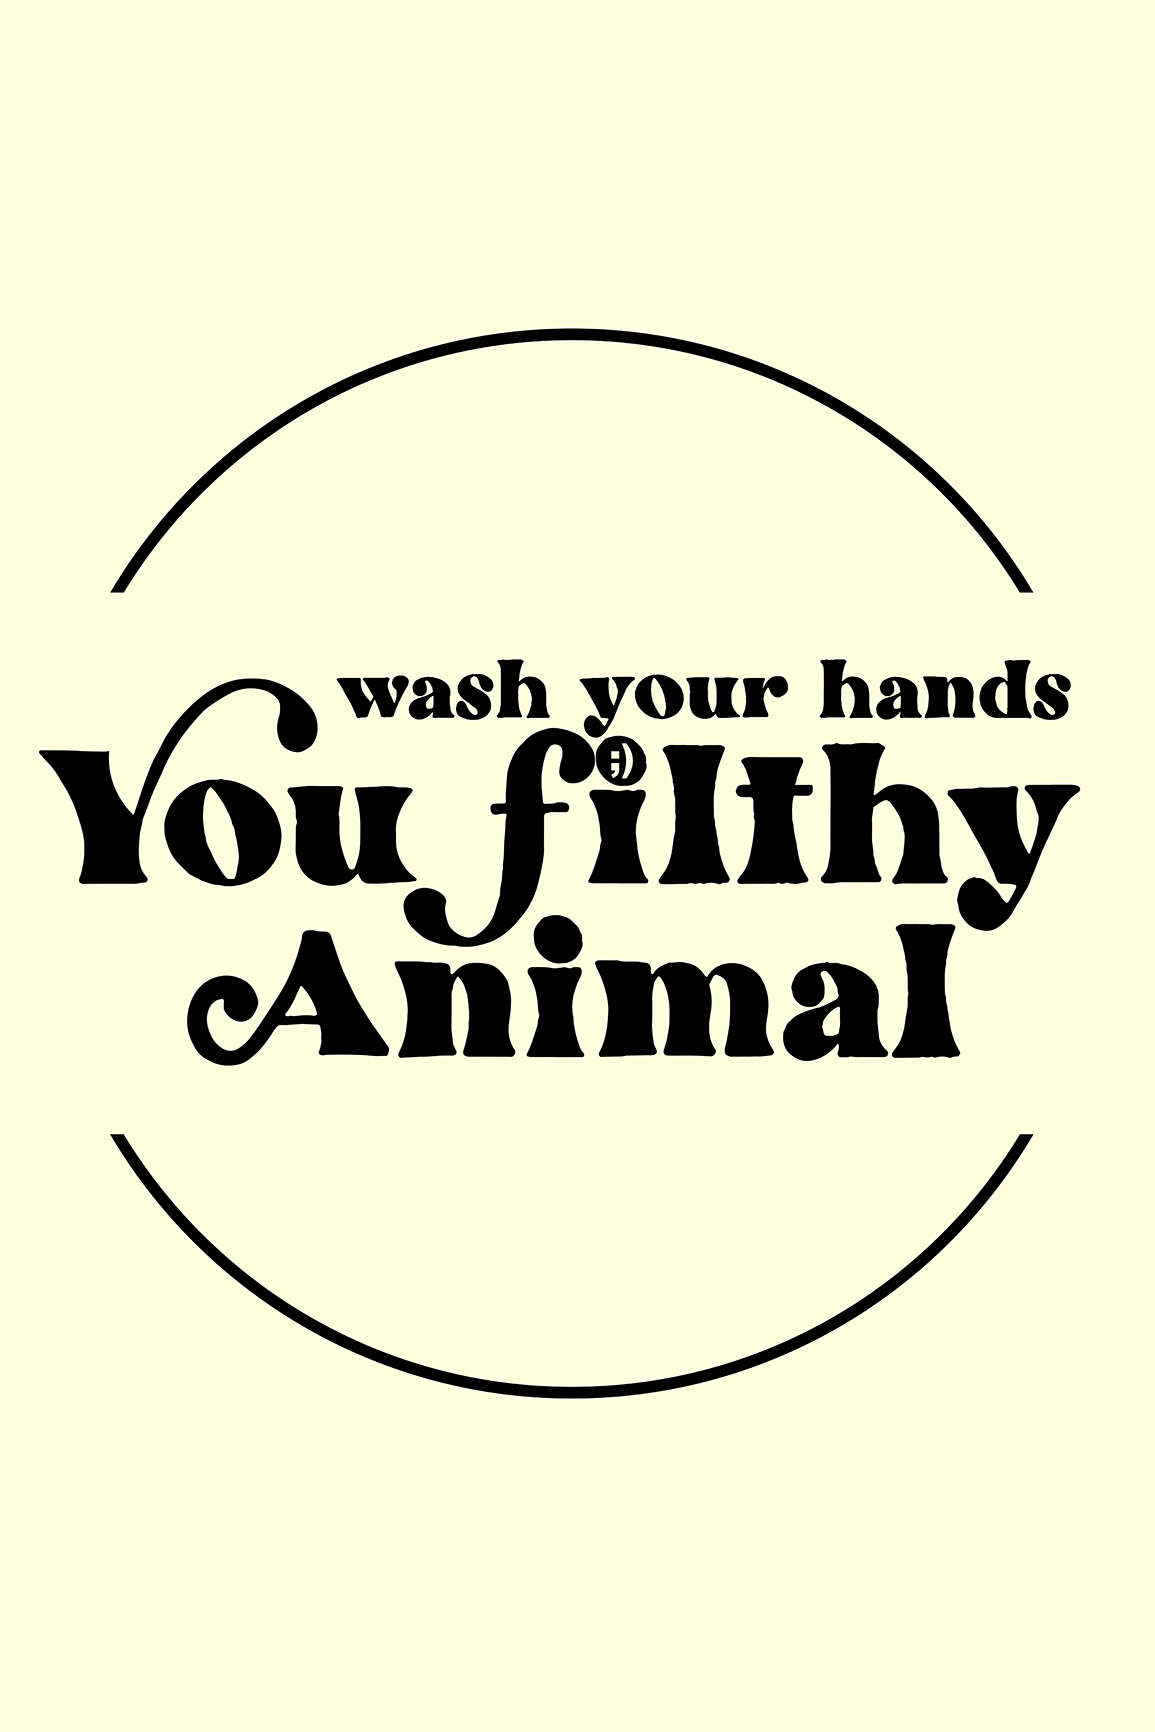 Wash your Hands!